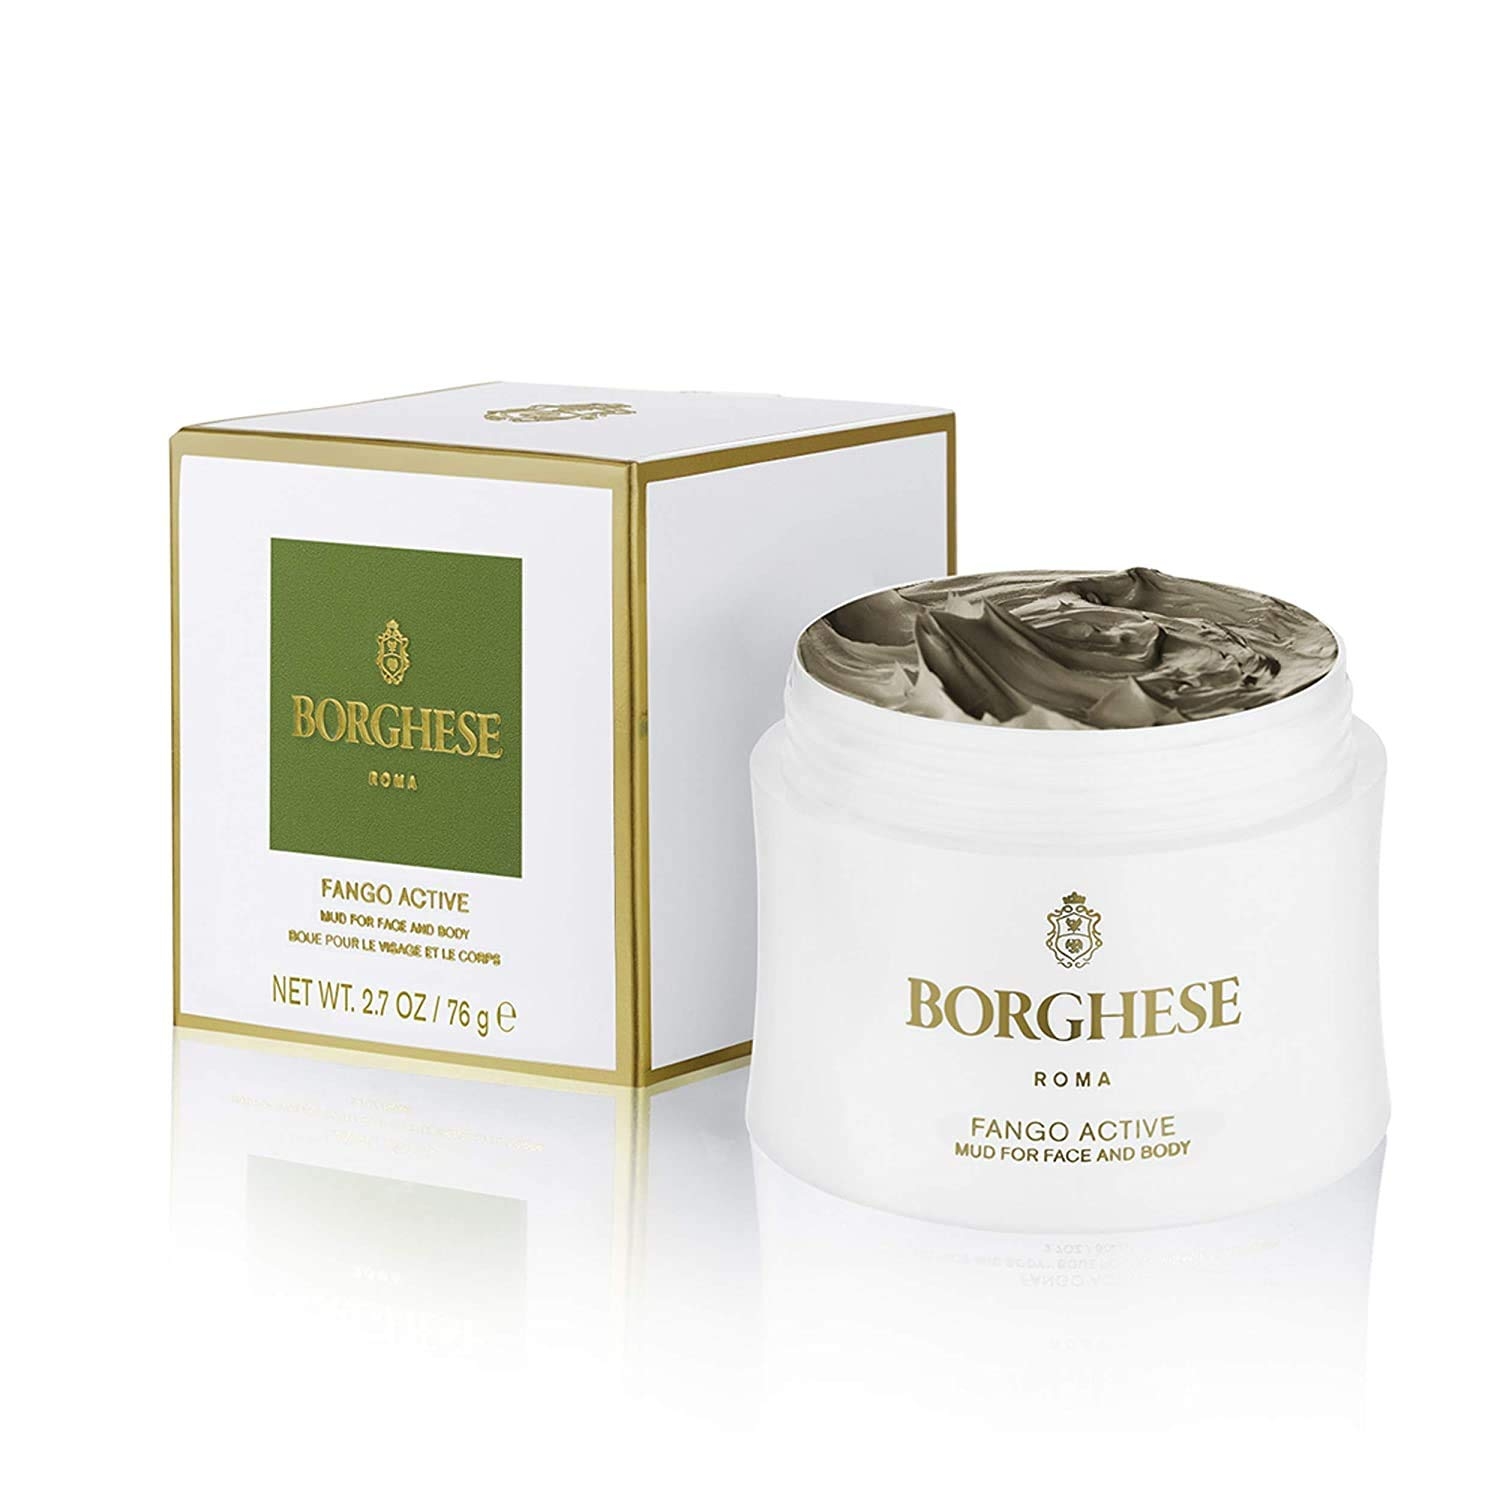 Borghese Fango Active Mud for Face and Body   price checker   price checker Description Gallery Reviews Variations Additional